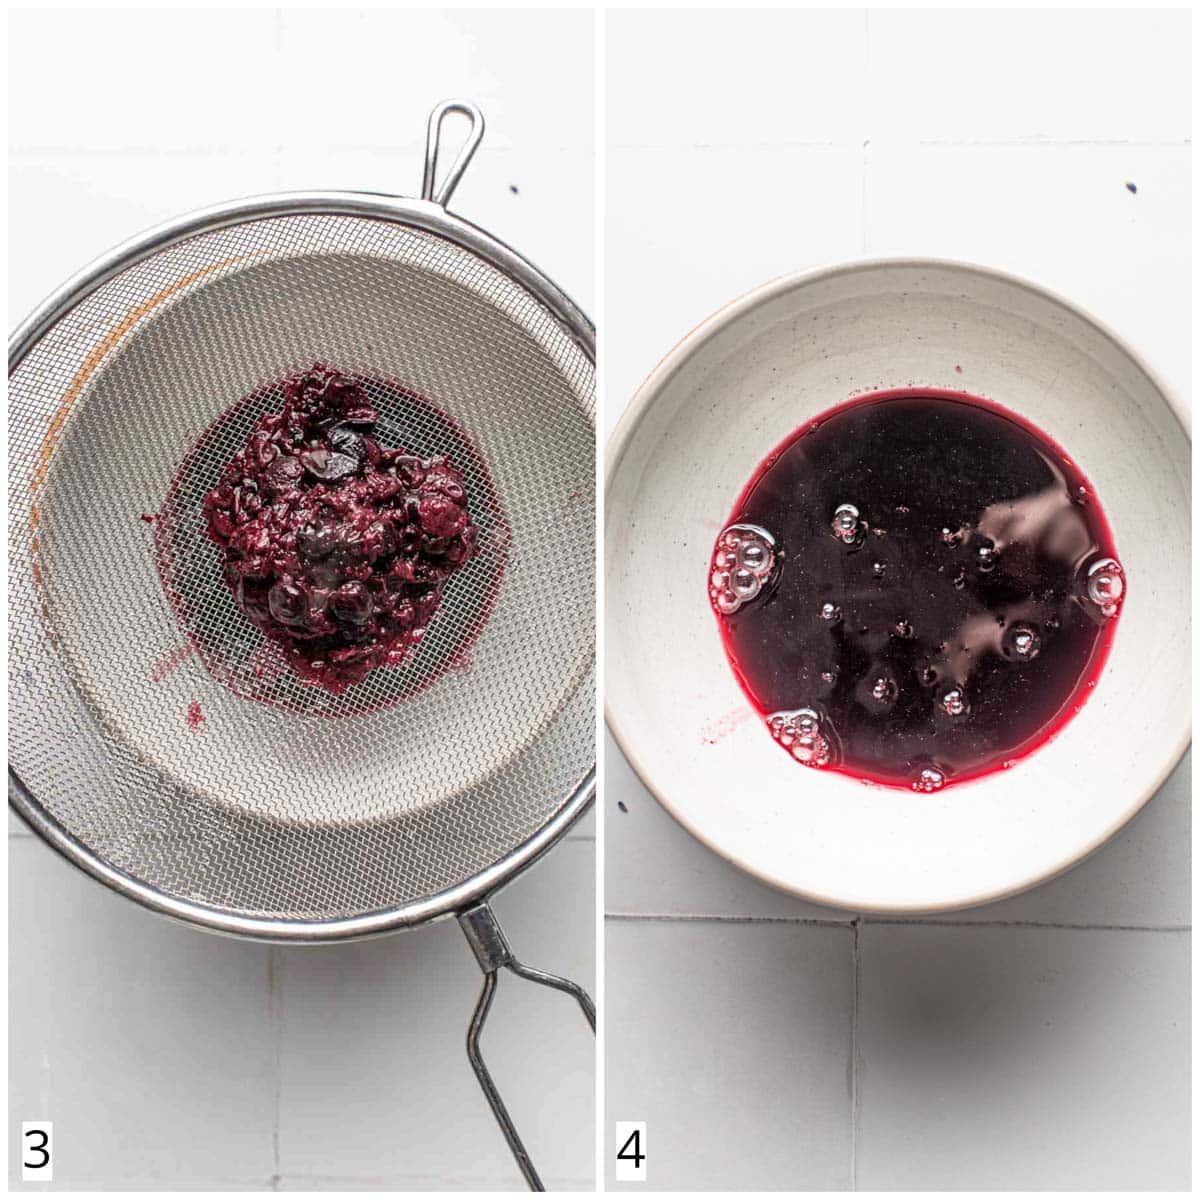 A collage of two images showing blueberries being squeezed through a sieve. 